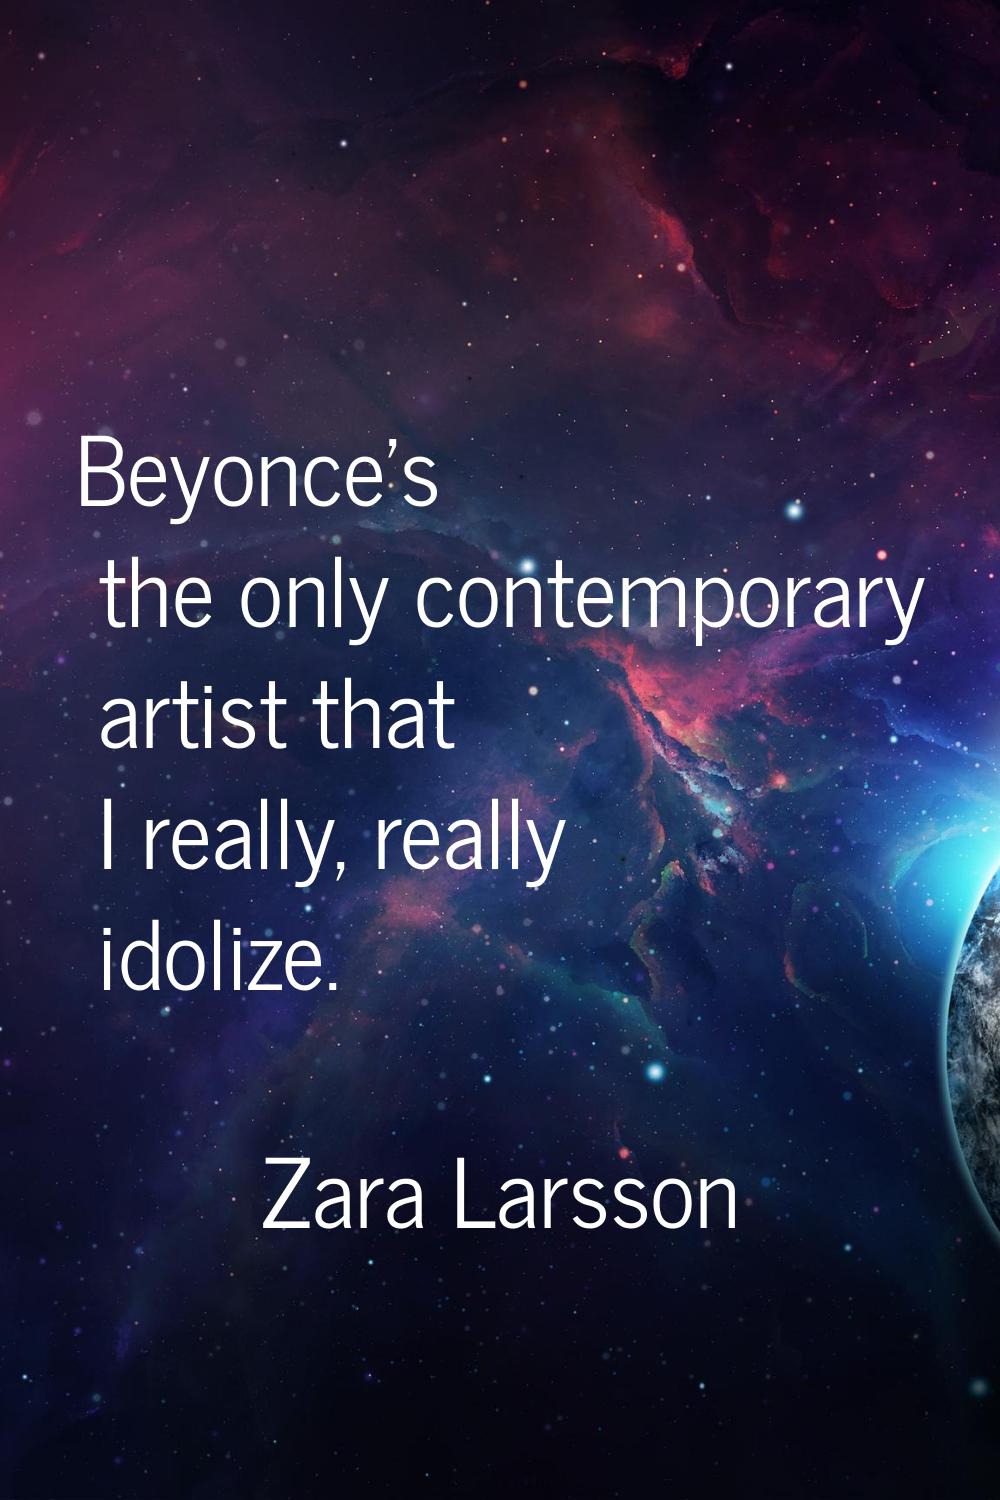 Beyonce's the only contemporary artist that I really, really idolize.